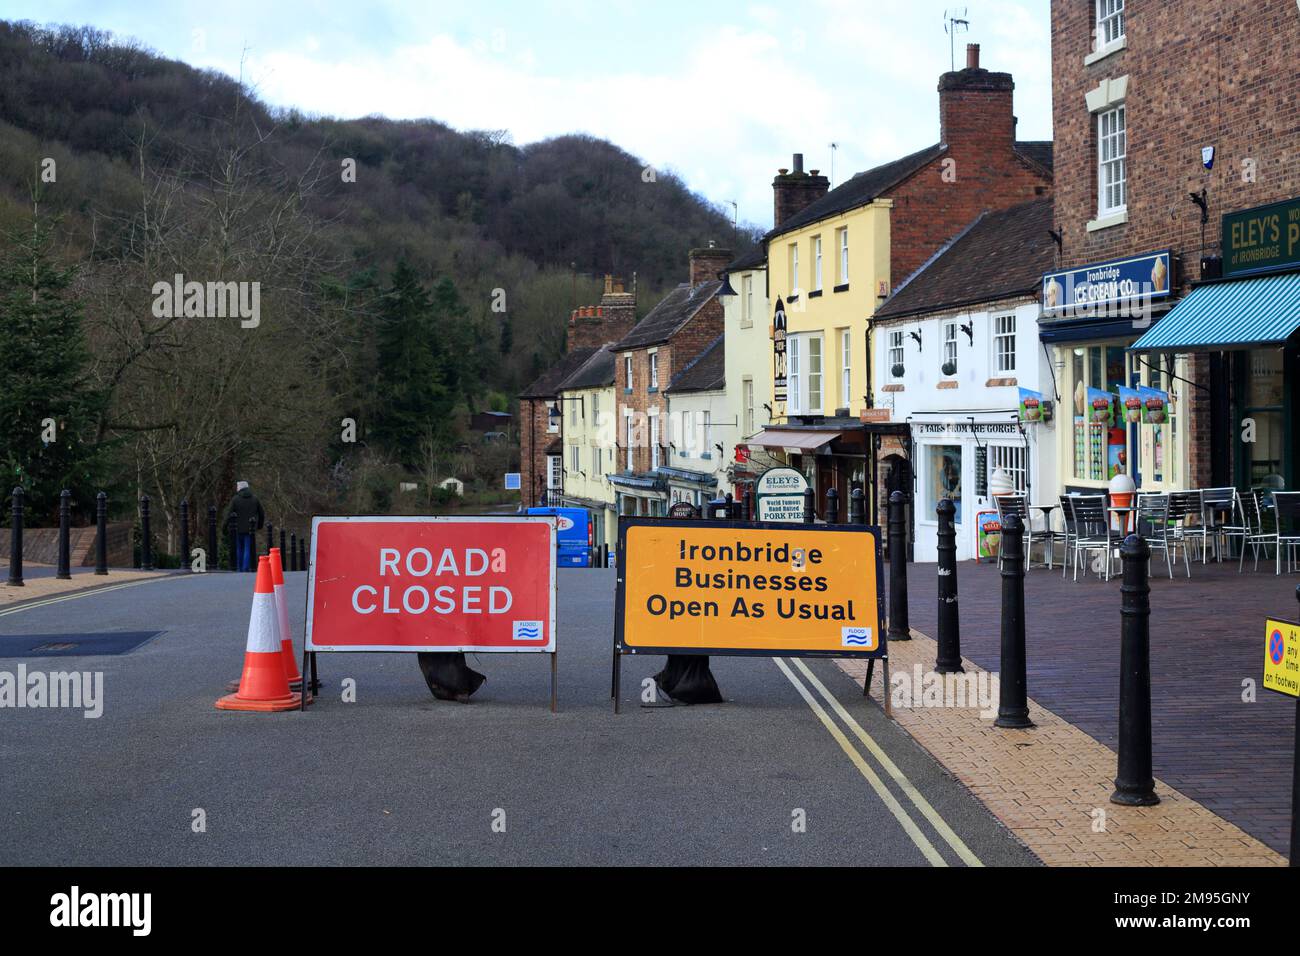 Road closed in Ironbridge, Shropshire due to erected flood defences. Stock Photo